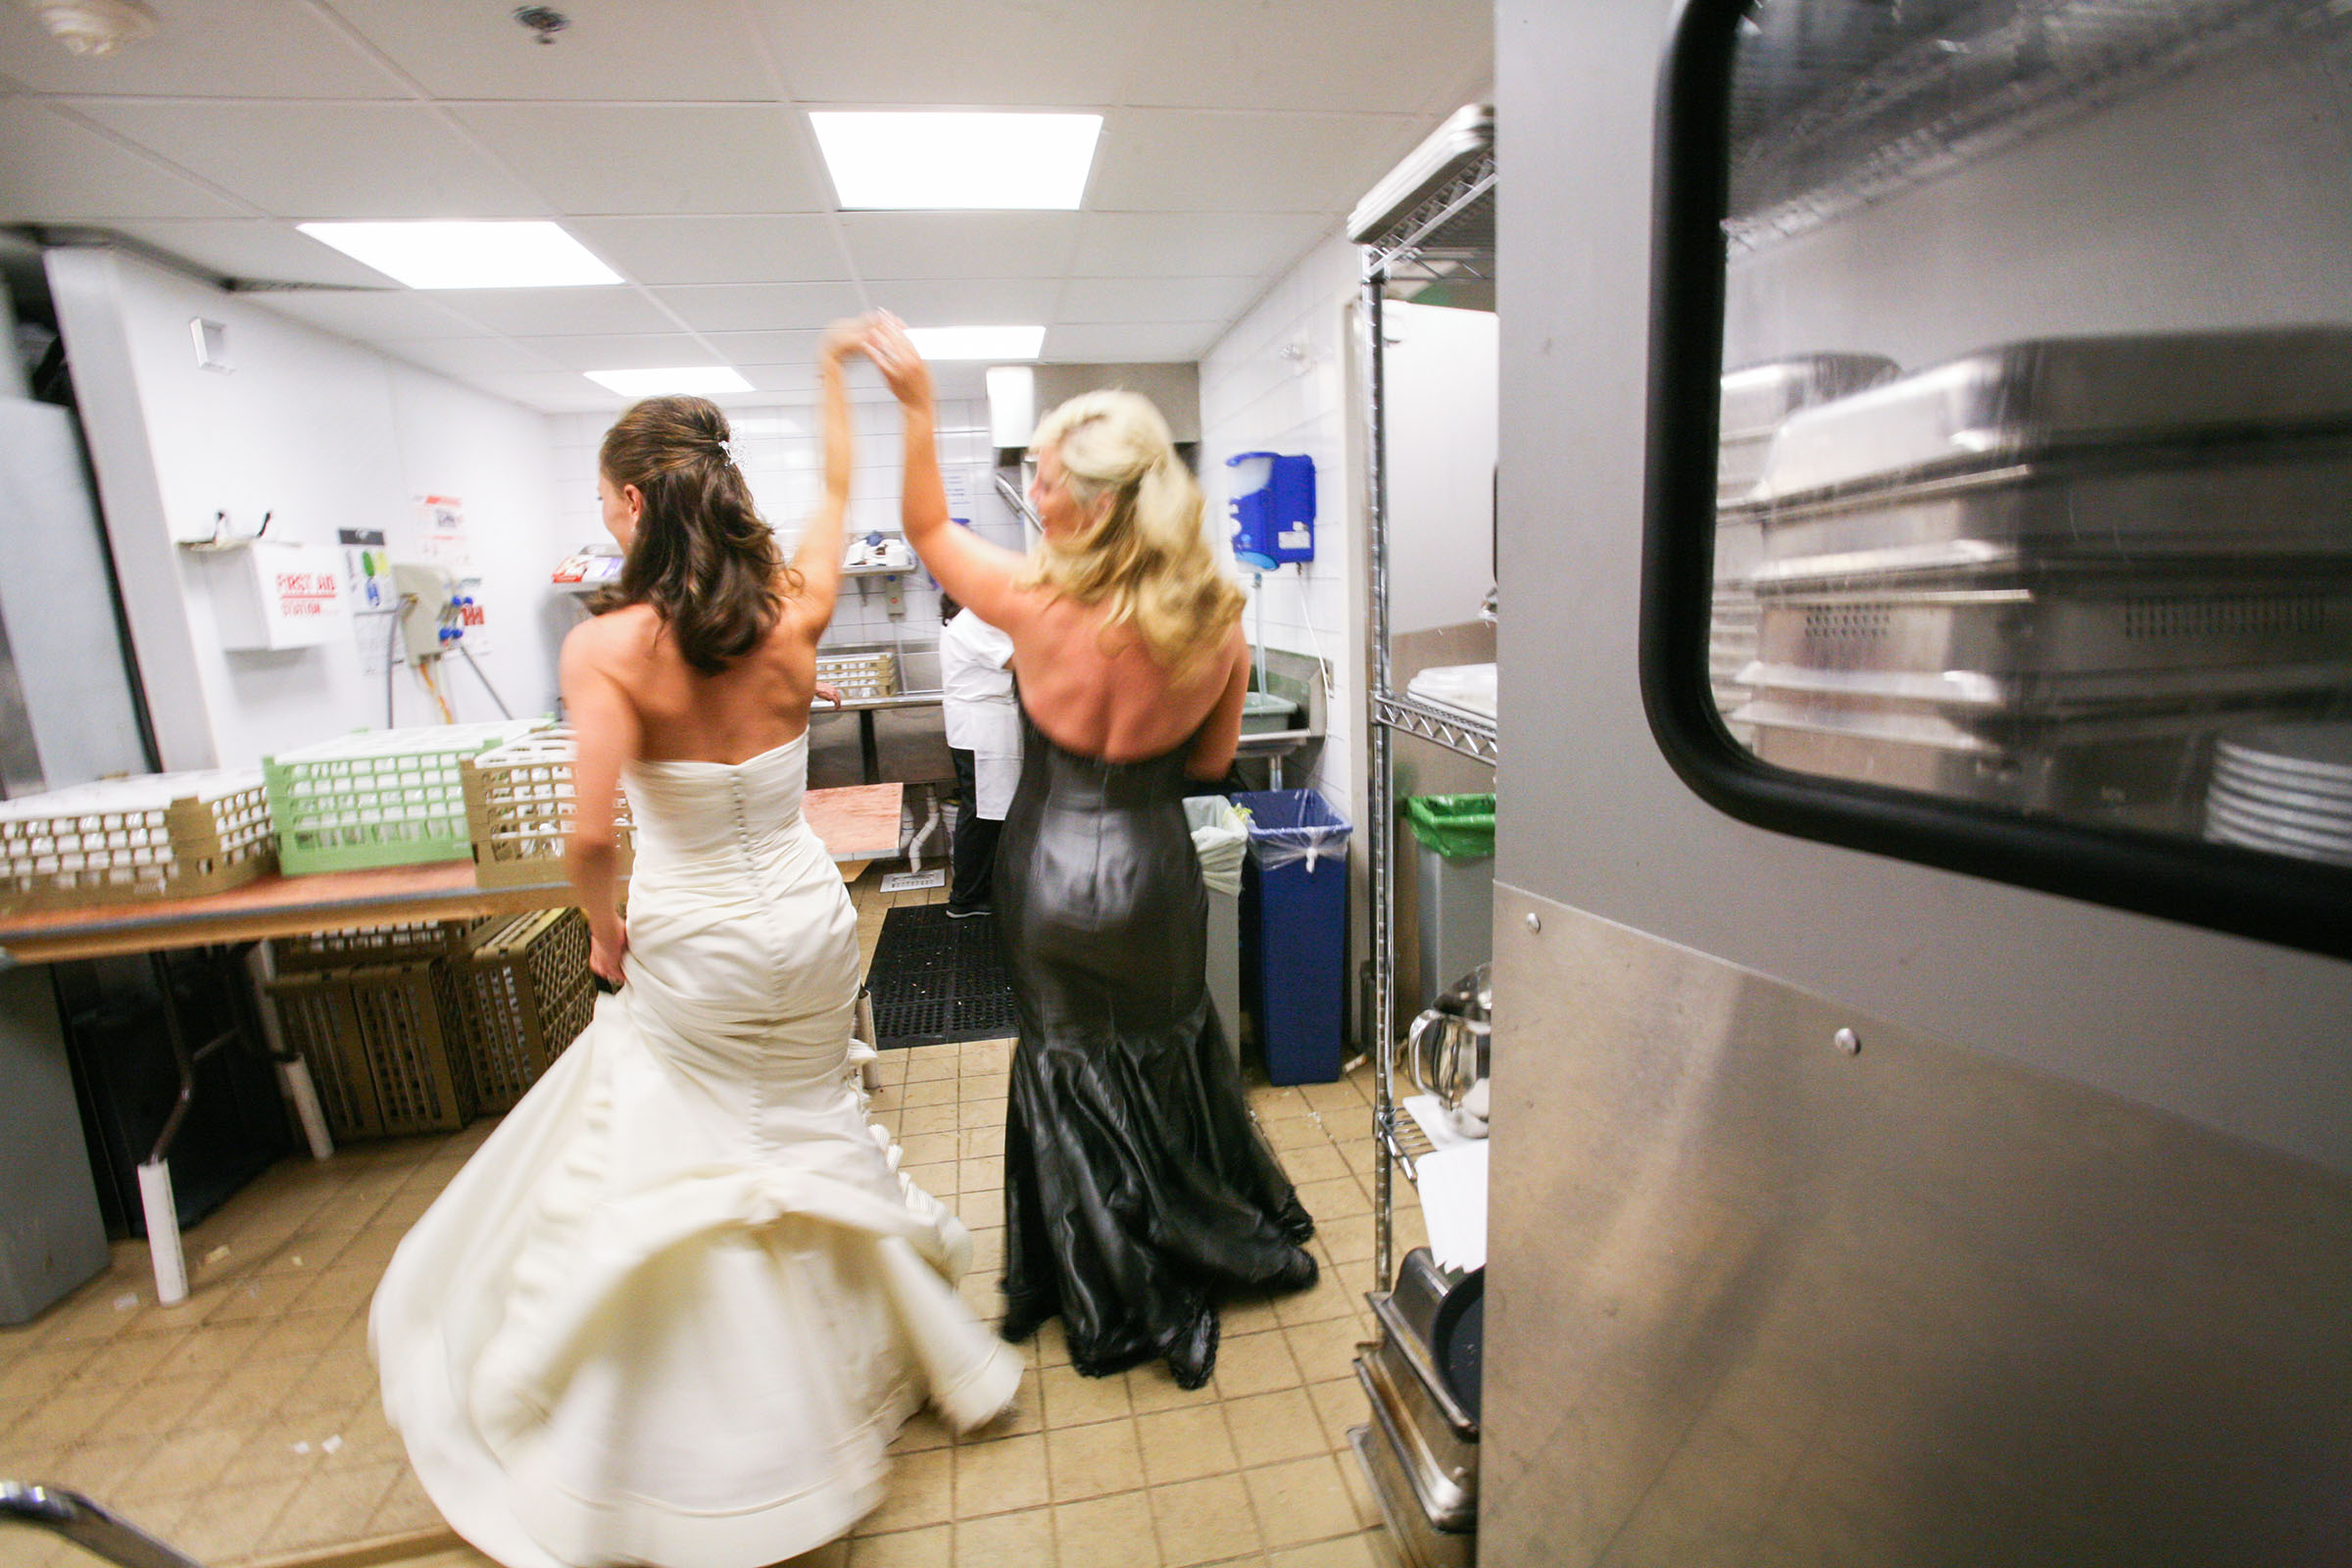 Bride and her bridesmaid dances into the kitchen at her wedding reception.